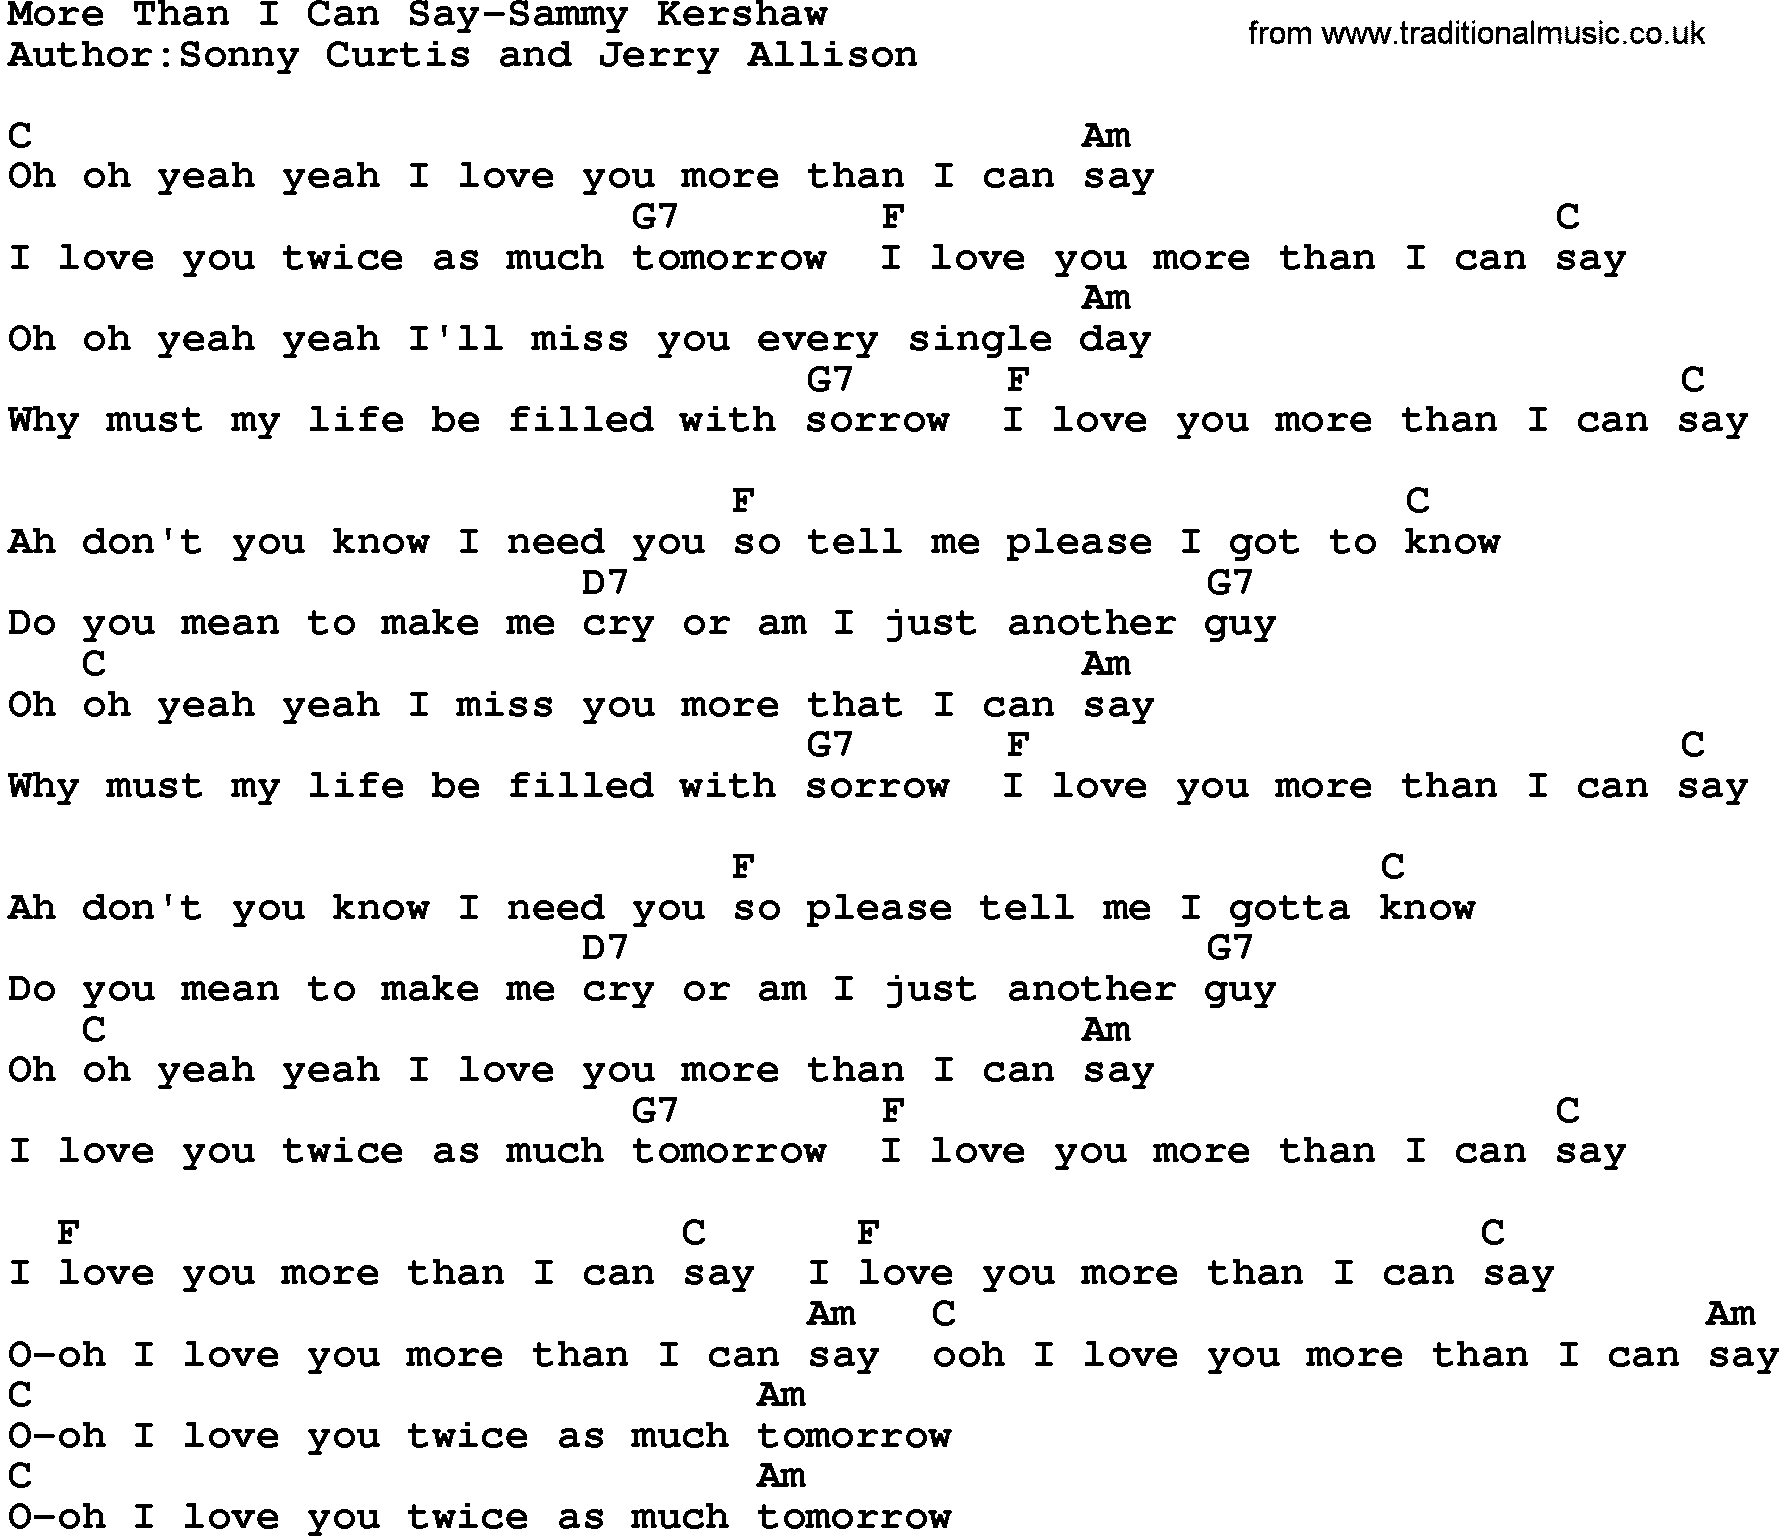 Country music song: More Than I Can Say-Sammy Kershaw lyrics and chords